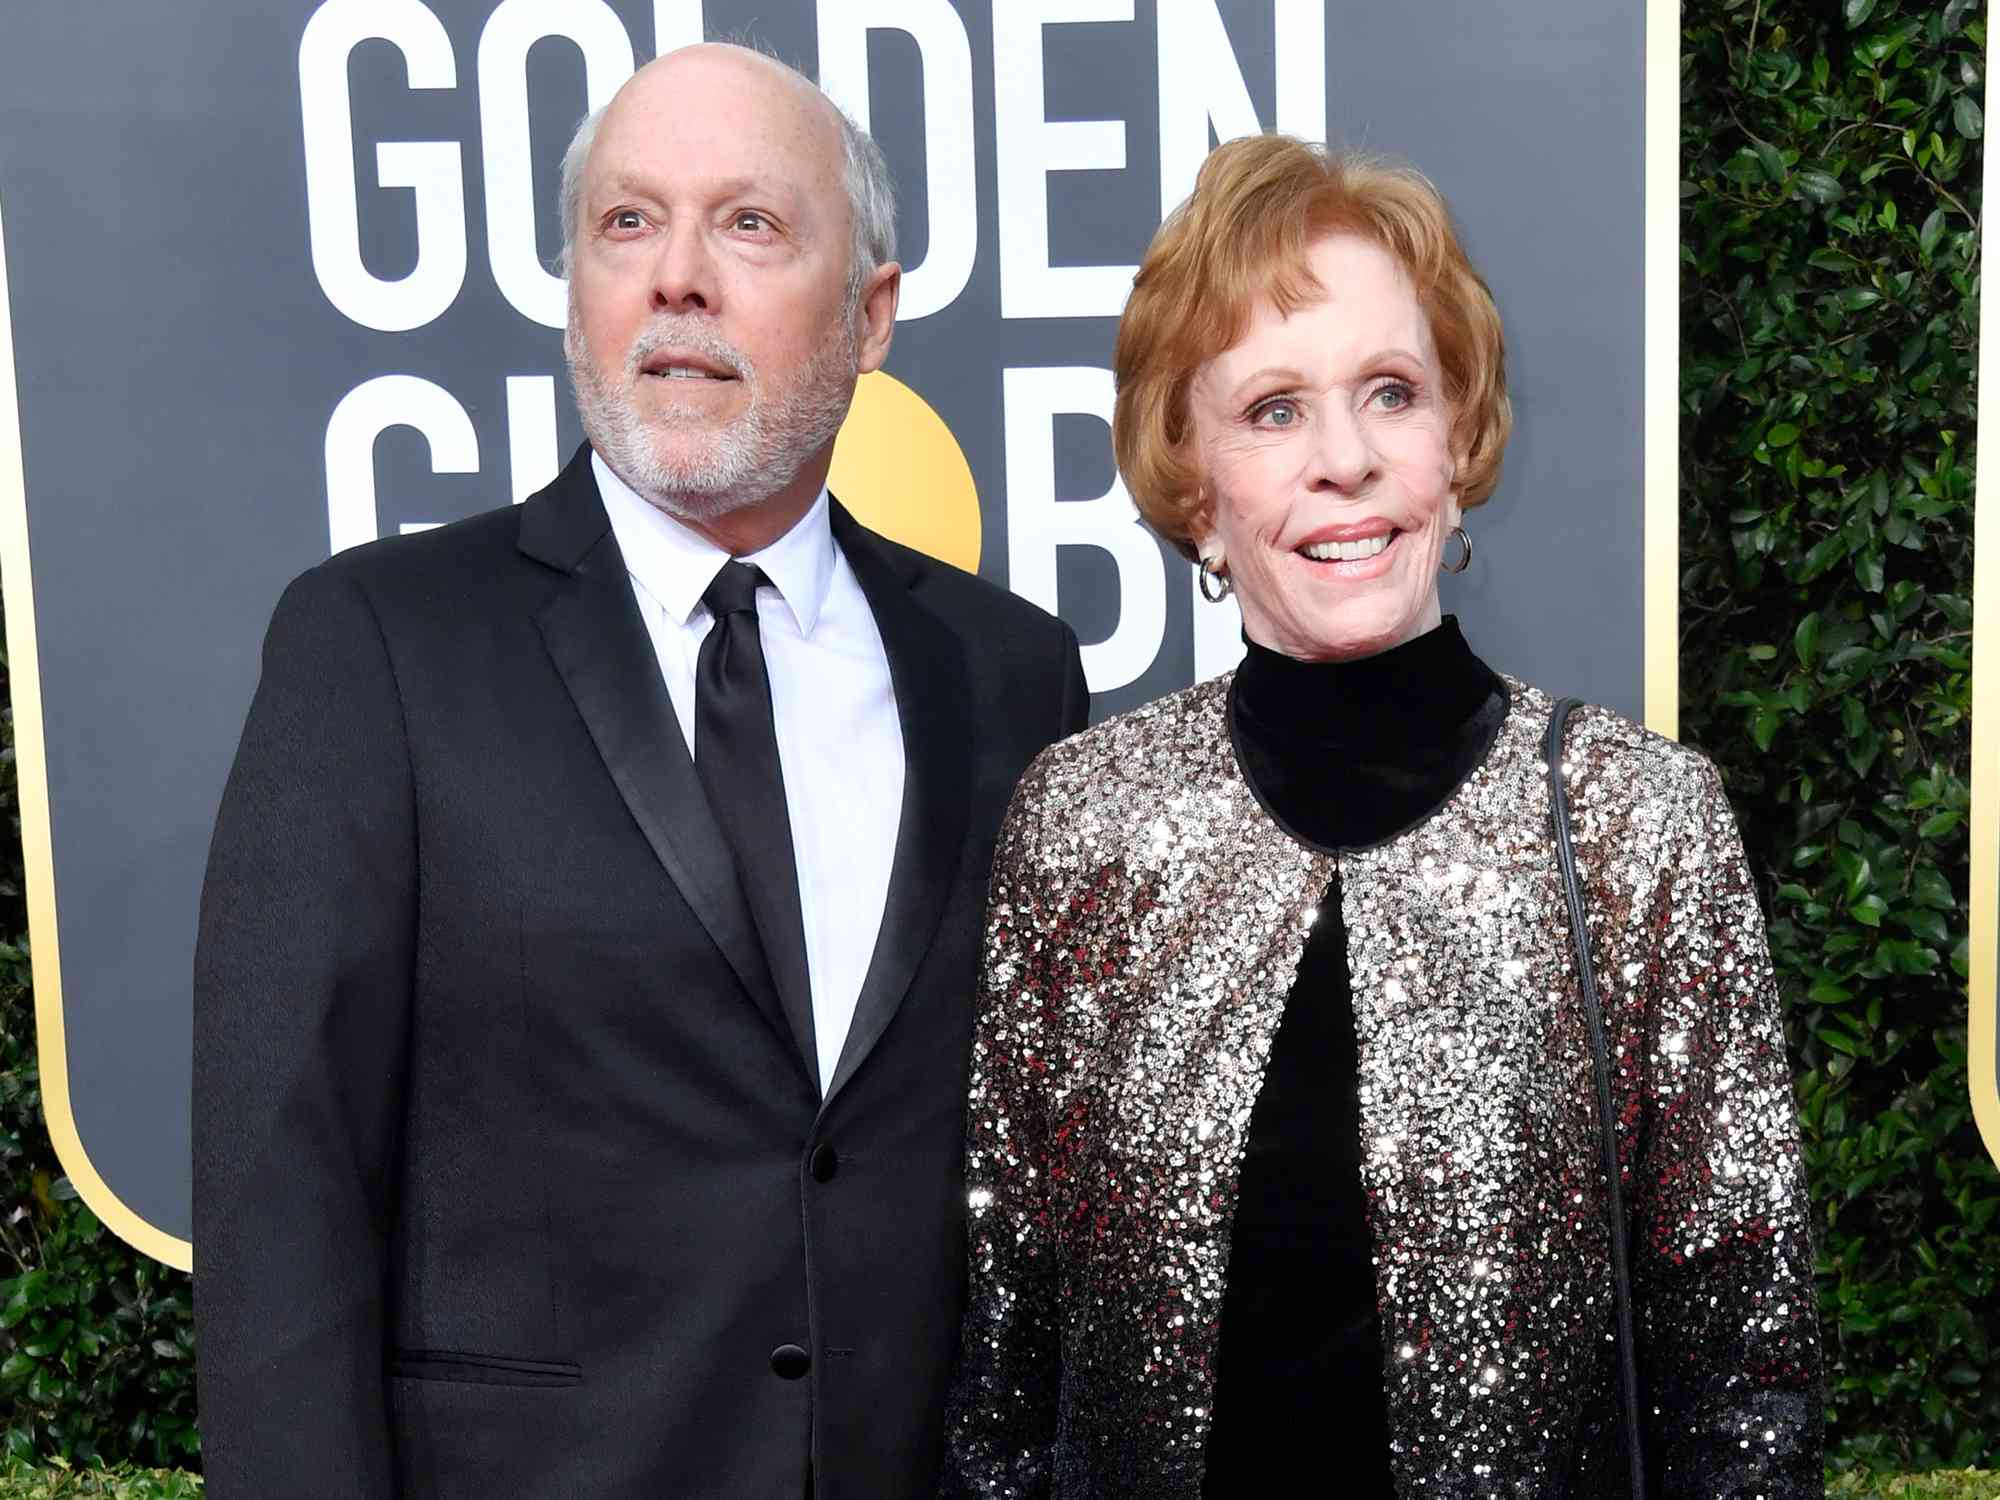 Brian Miller and Carol Burnett attend the 77th Annual Golden Globe Awards at The Beverly Hilton Hotel on January 05, 2020 in Beverly Hills, California